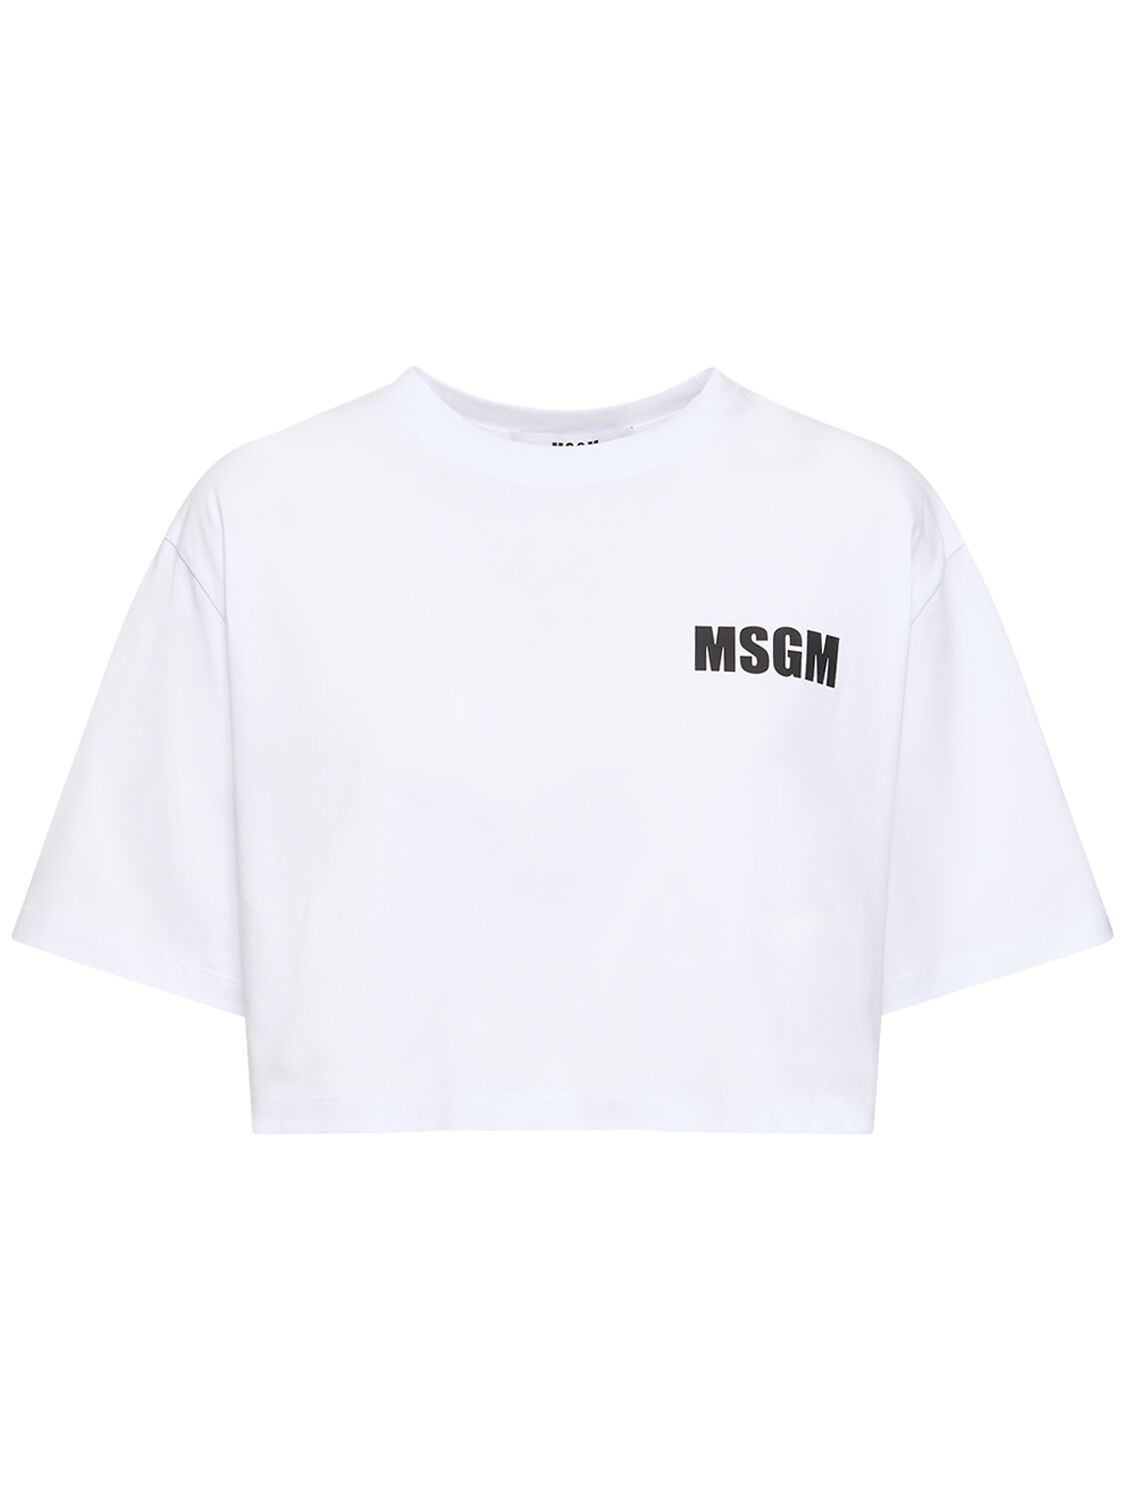 Msgm Cropped Cotton T-shirt In Optic White